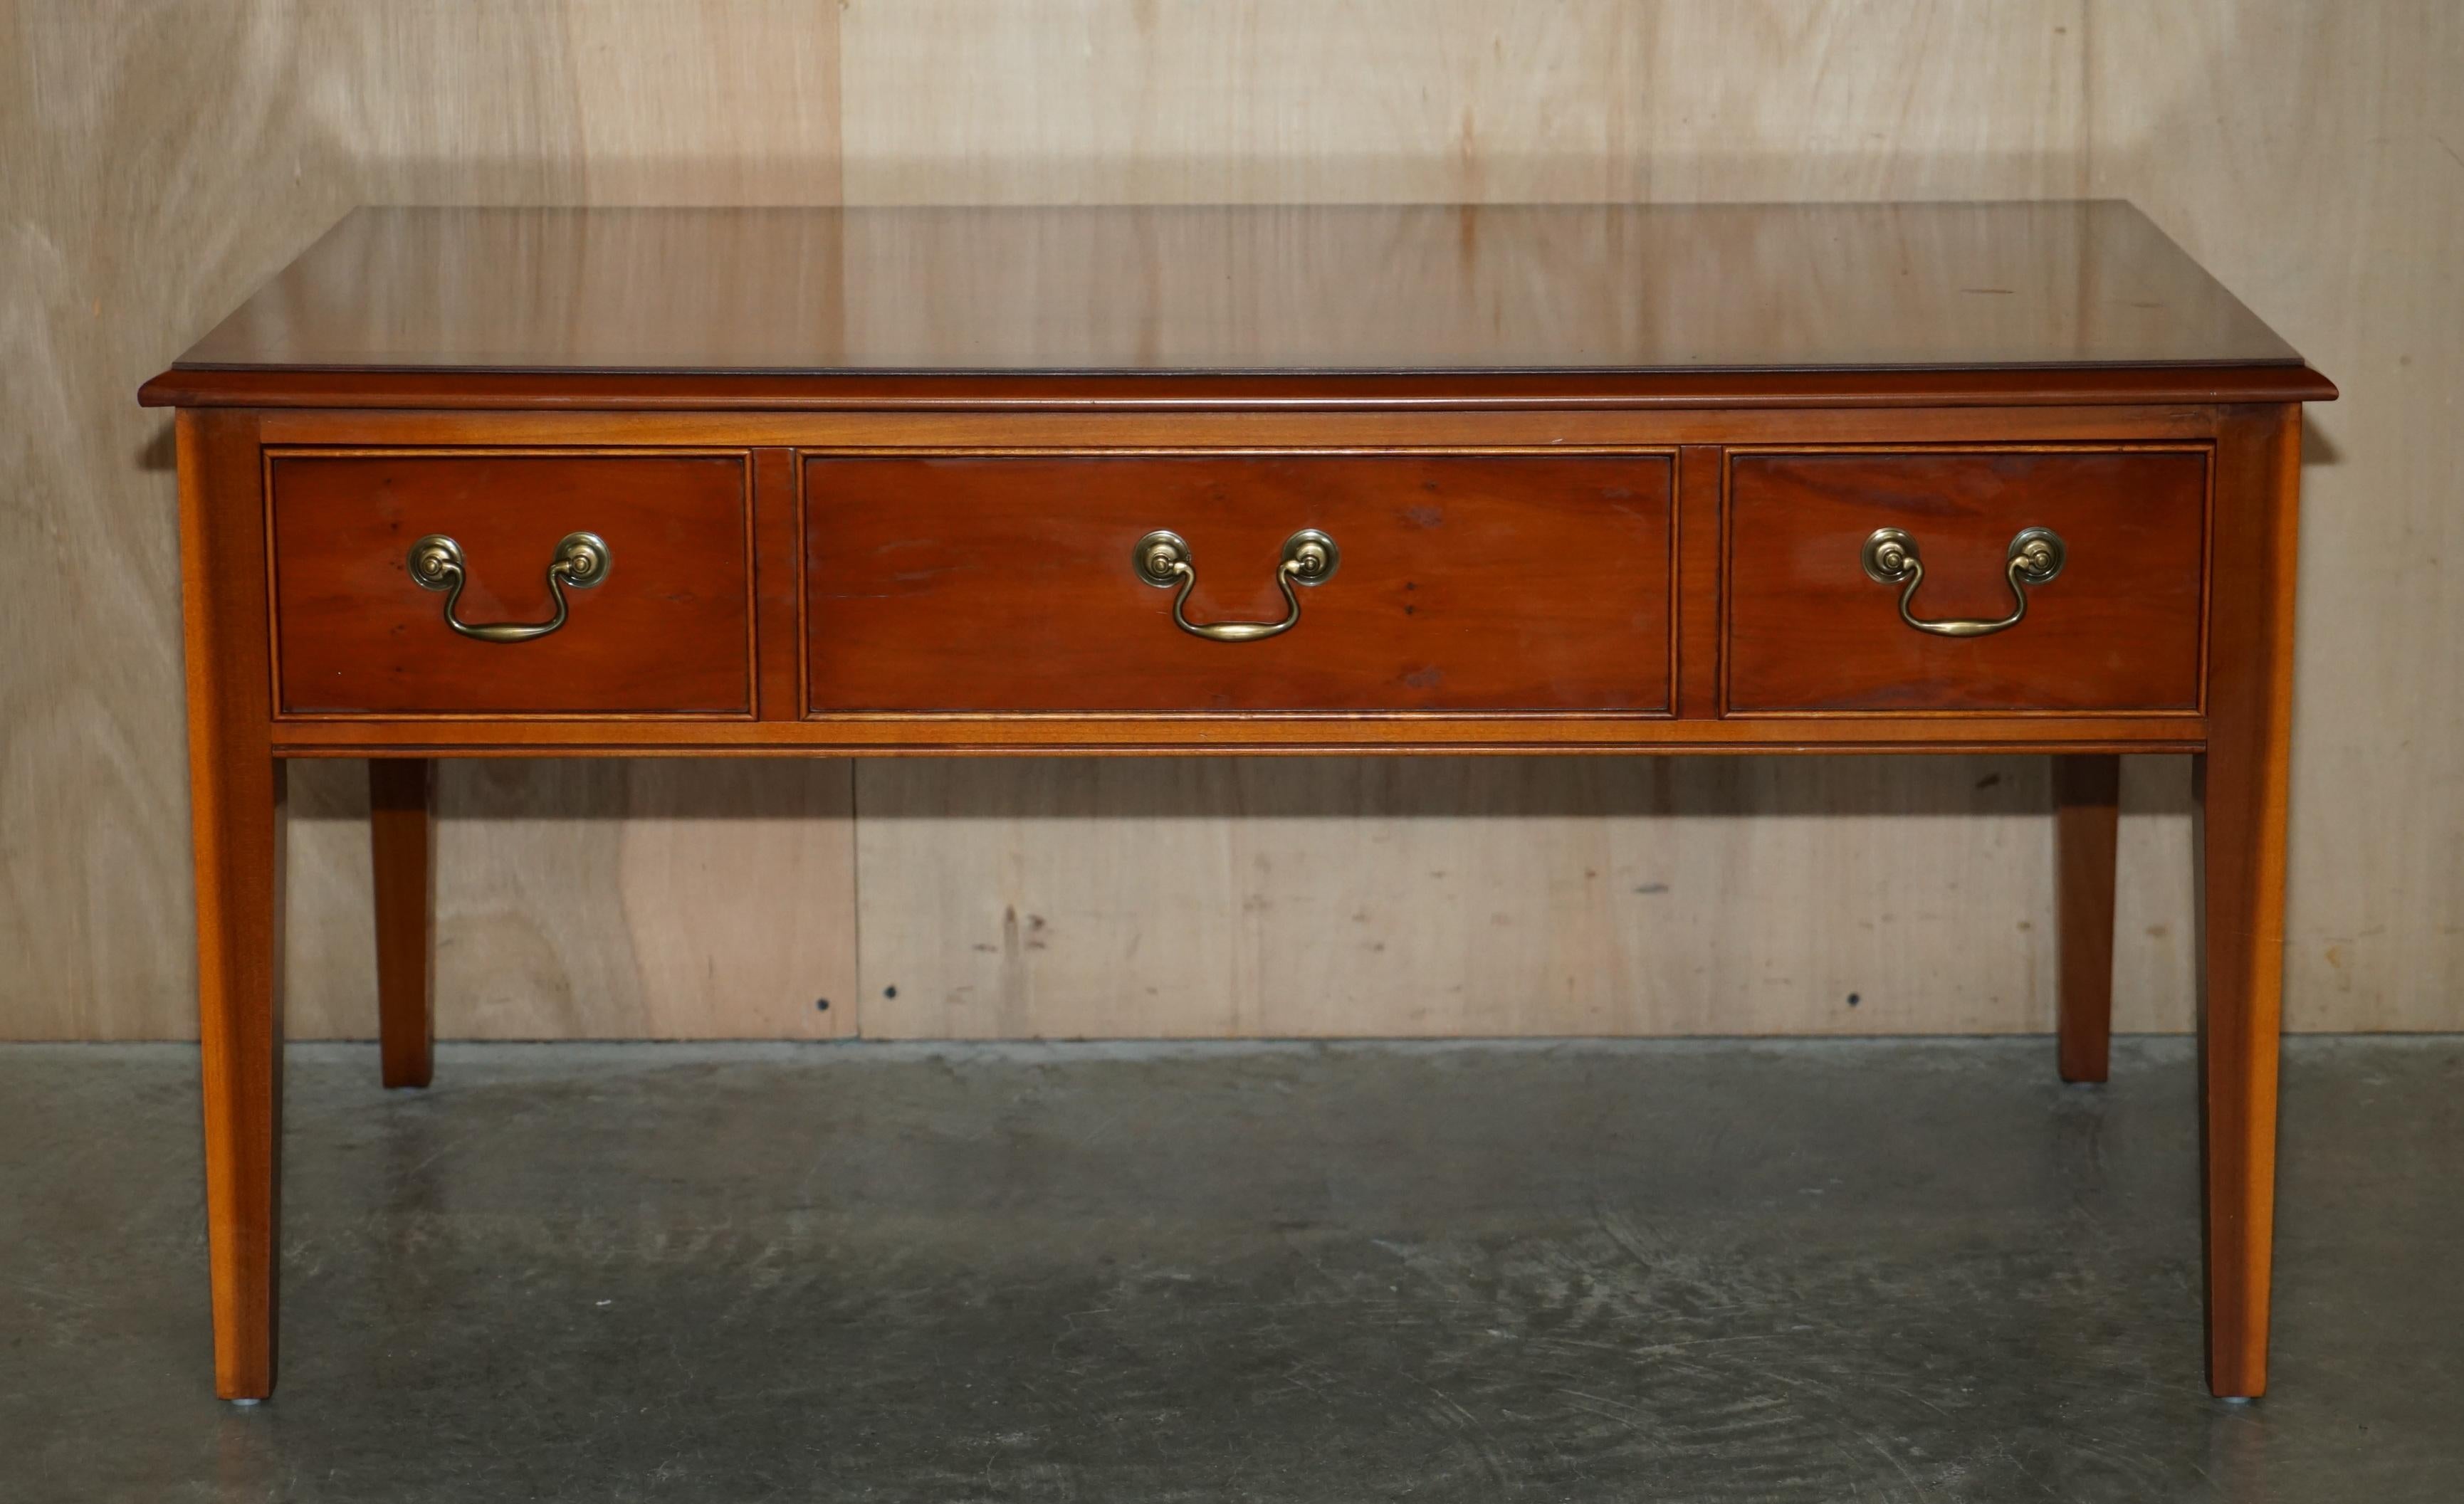 Royal House Antiques

Royal House Antiques is delighted to offer for sale this lovely condition Bradley Furniture twin drawer Burr Yew wood coffee table with rare twin slip butlers serving trays 

Please note the delivery fee listed is just a